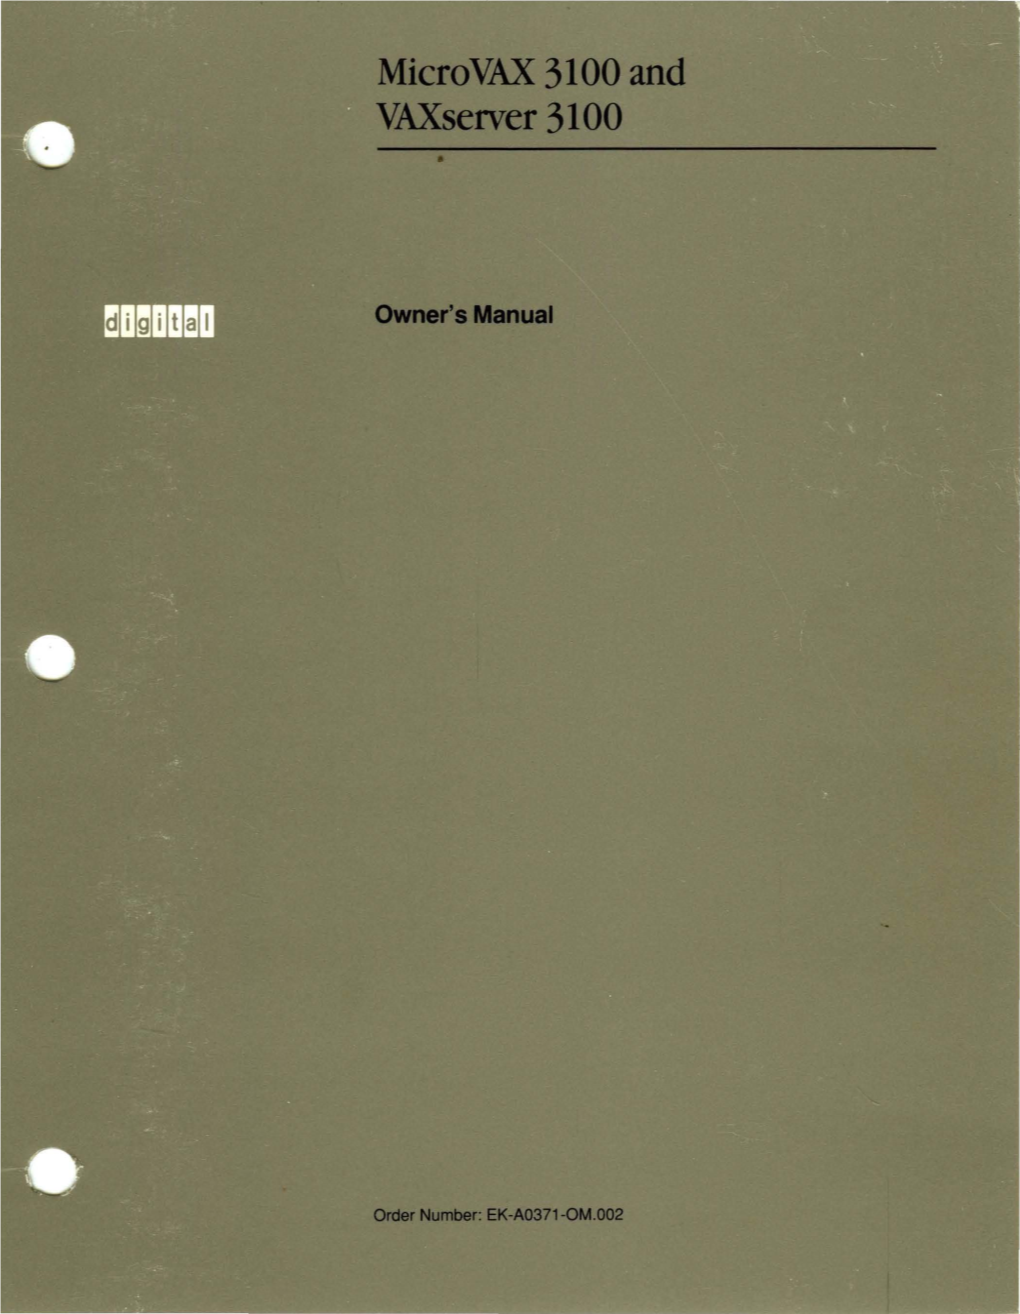 Microvax 3100 Owner's Manual